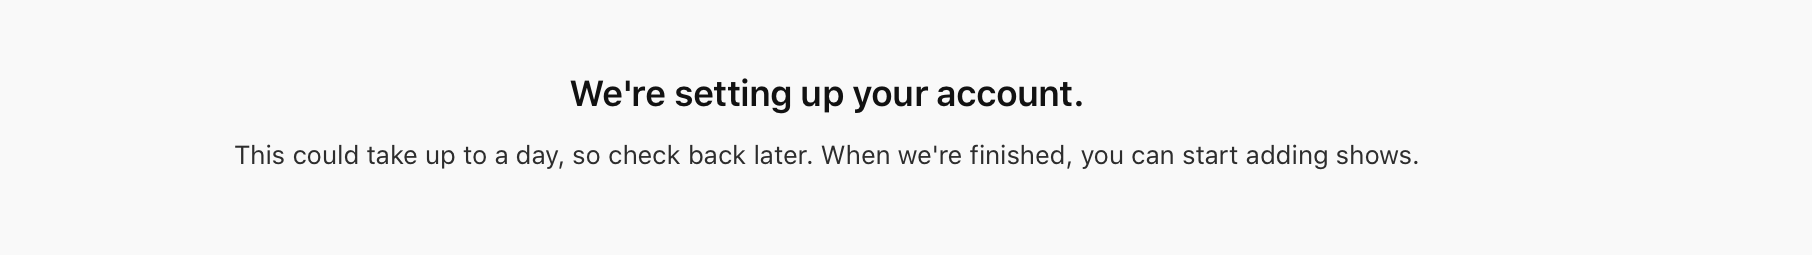 Setting up your account